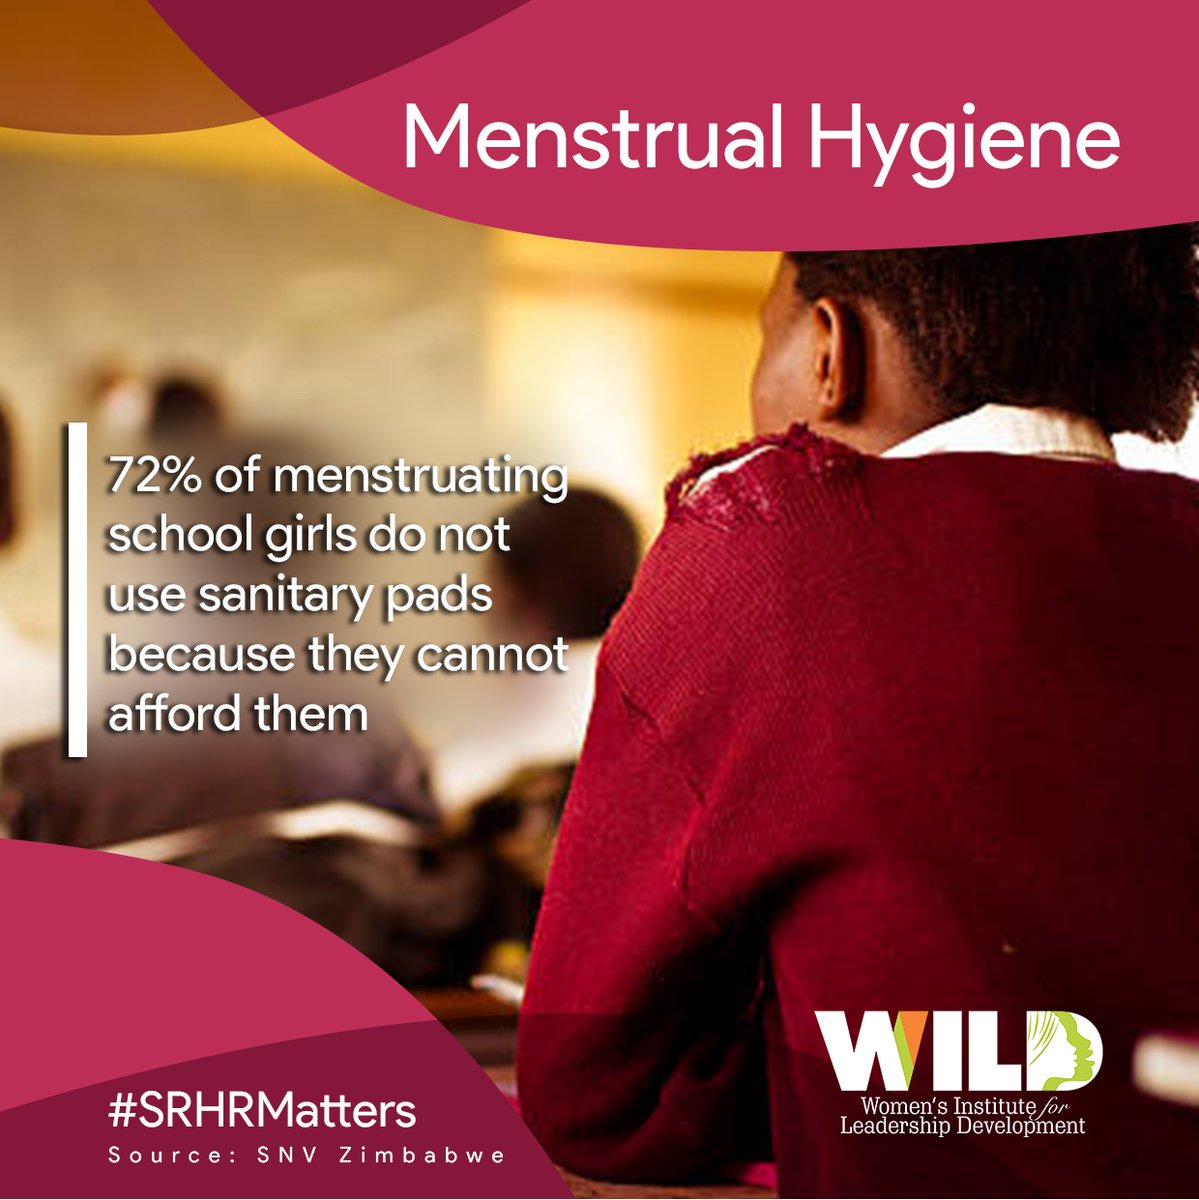 Did you know: 72% of menstruating school girls do not use sanitary pads because they cannot afford them #SRHRMatters